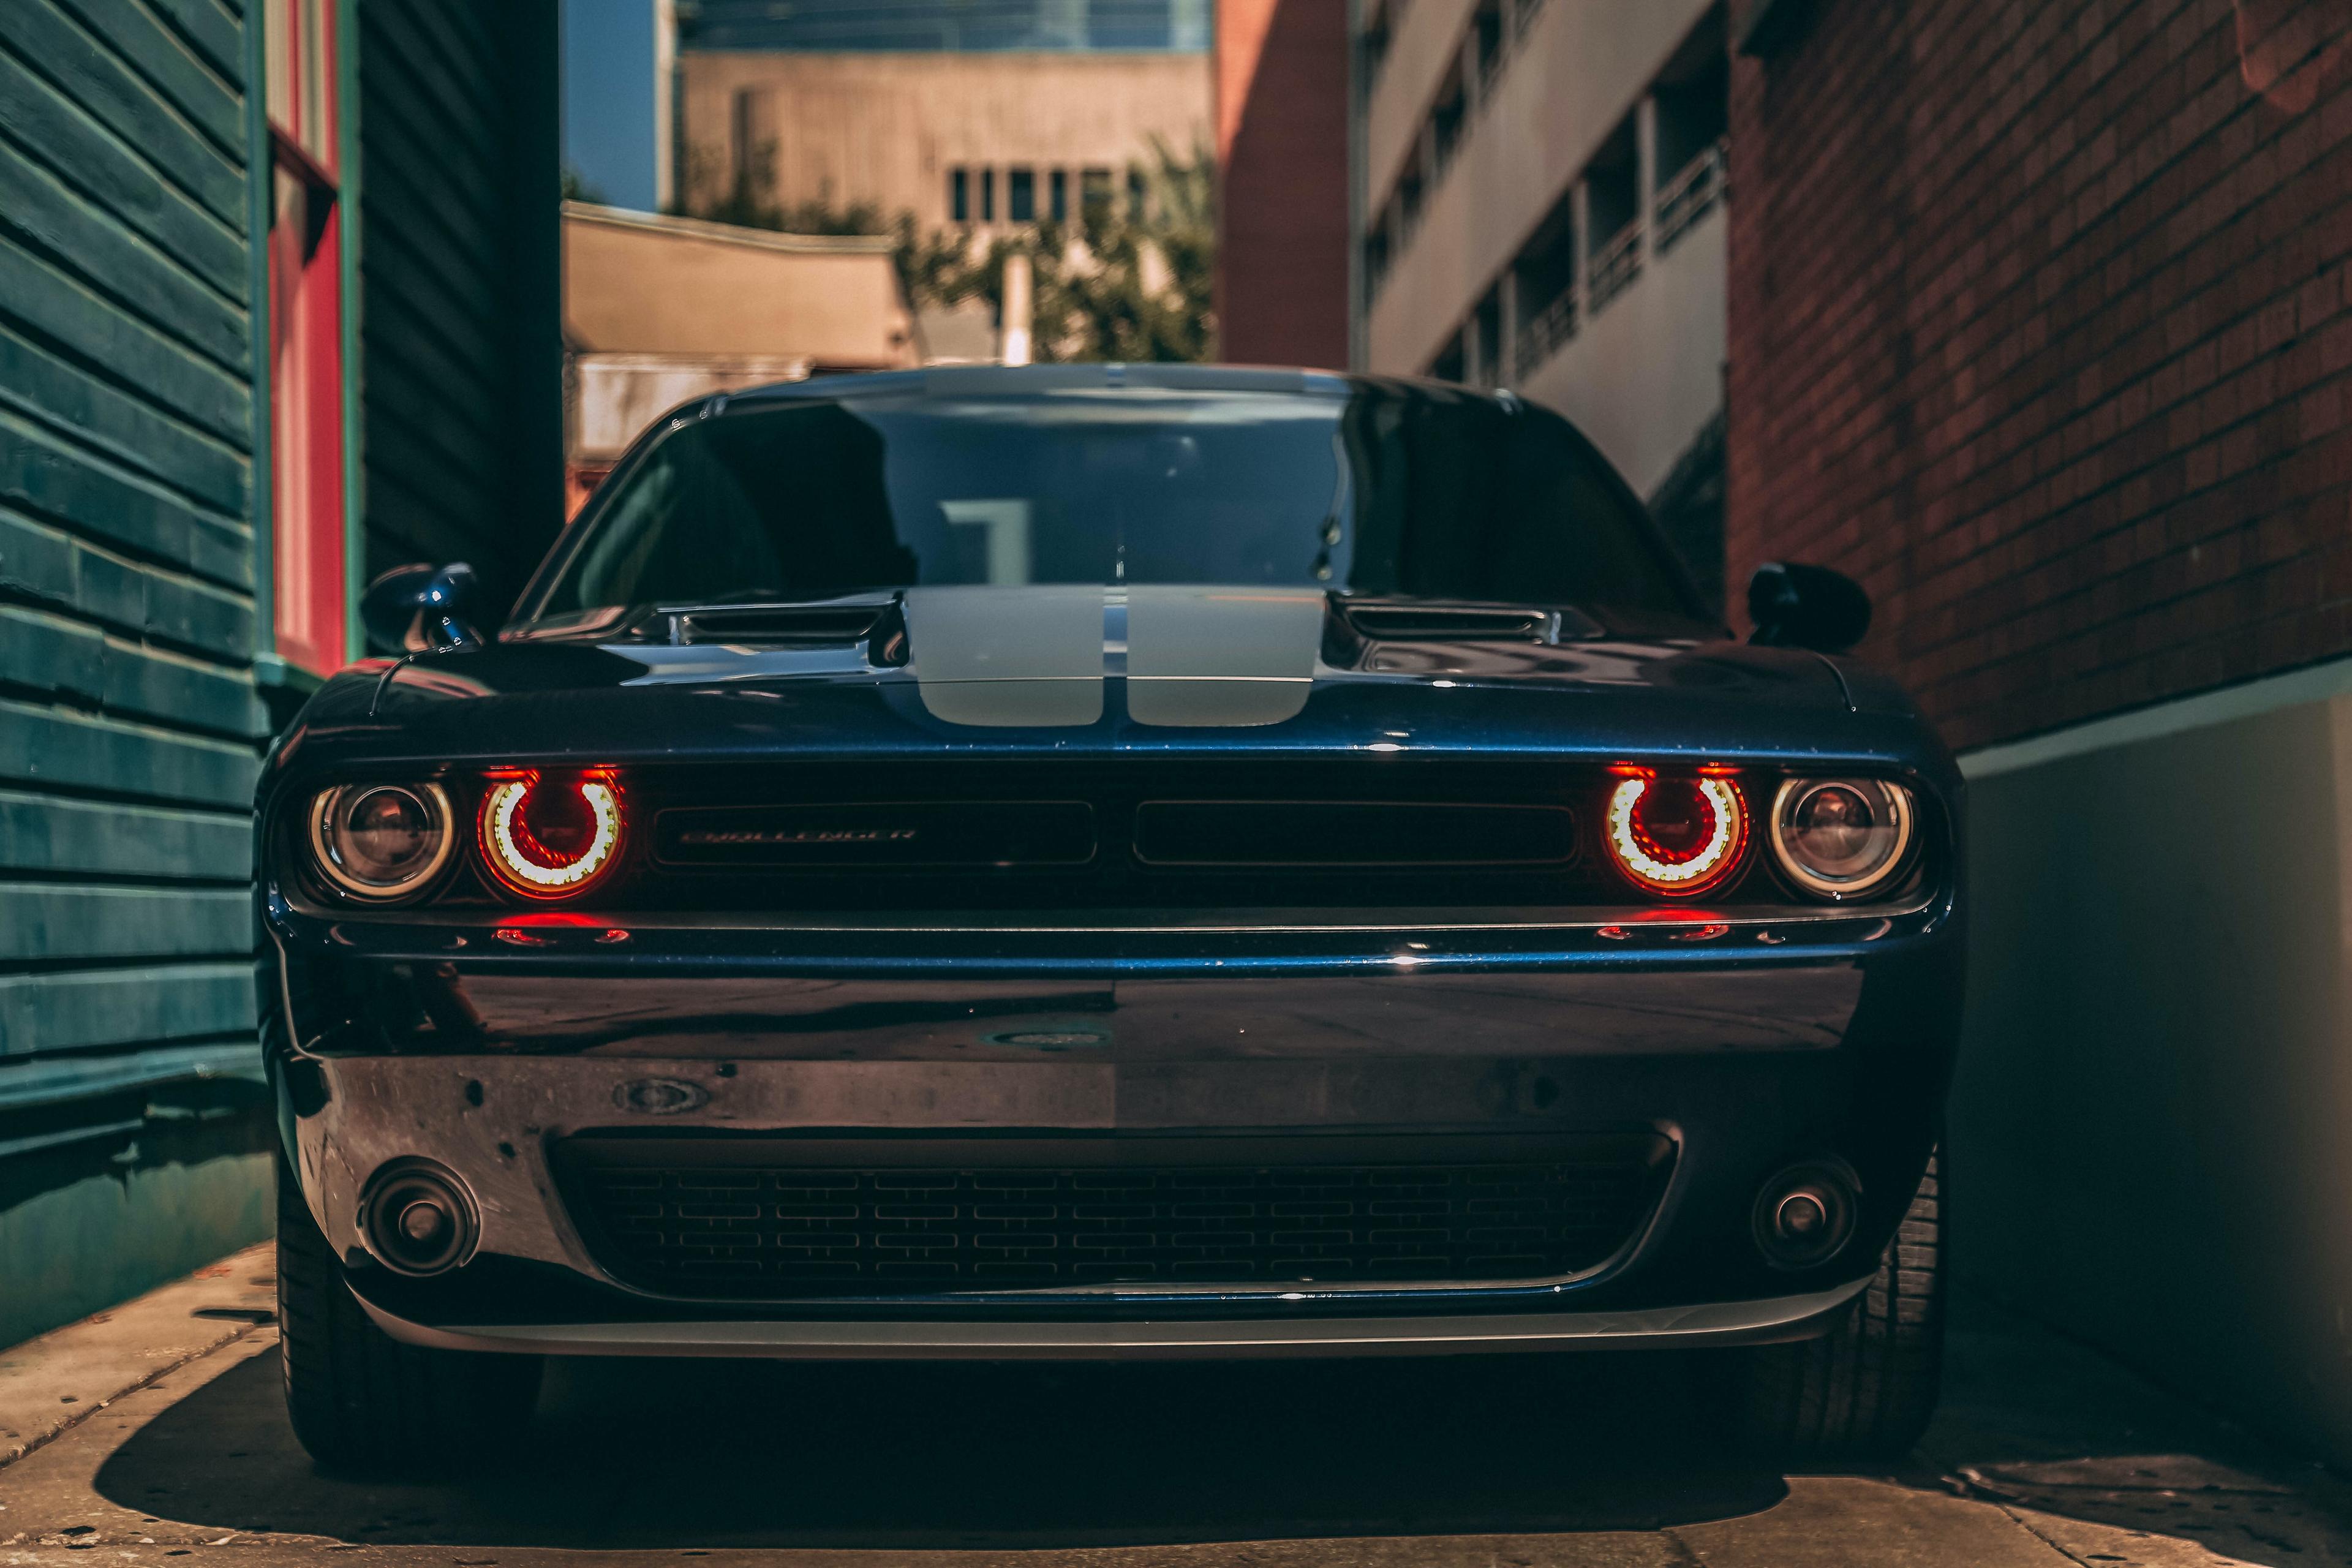 A Dodge Challenger in an alleyway. 